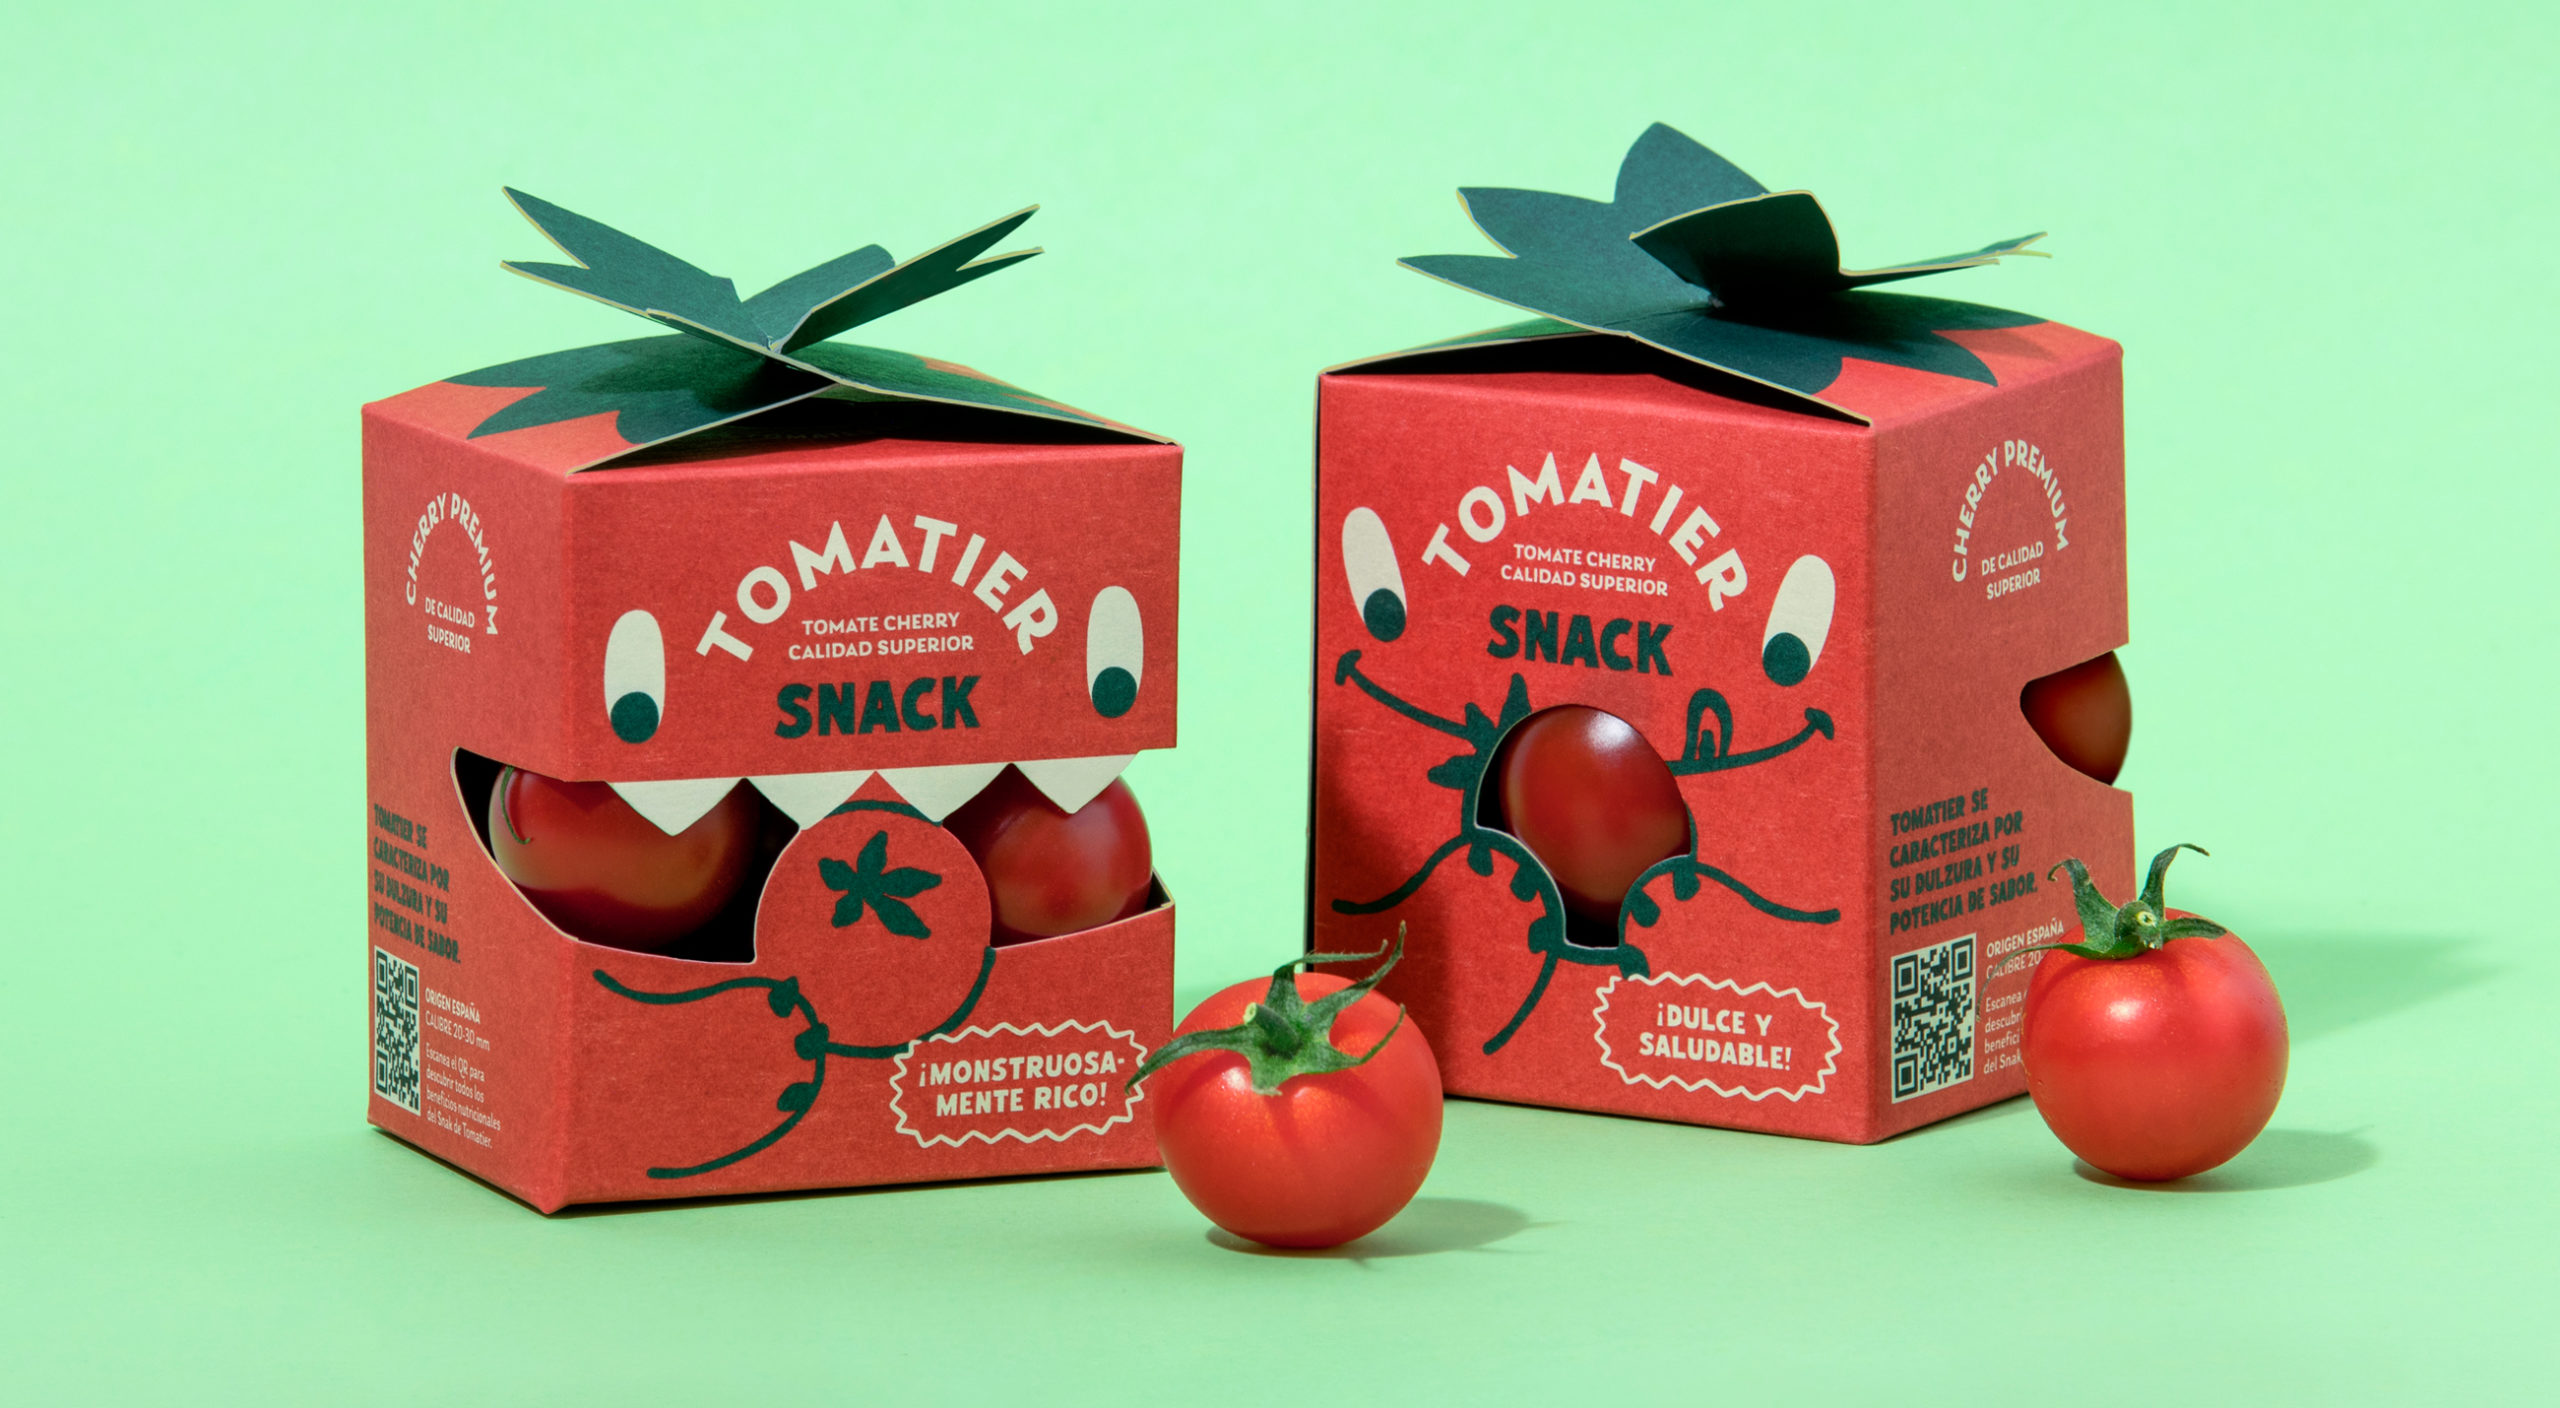 Tomatier Snack’s Cherry Tomatoes Come in an Irresistible Tomato Monster Box